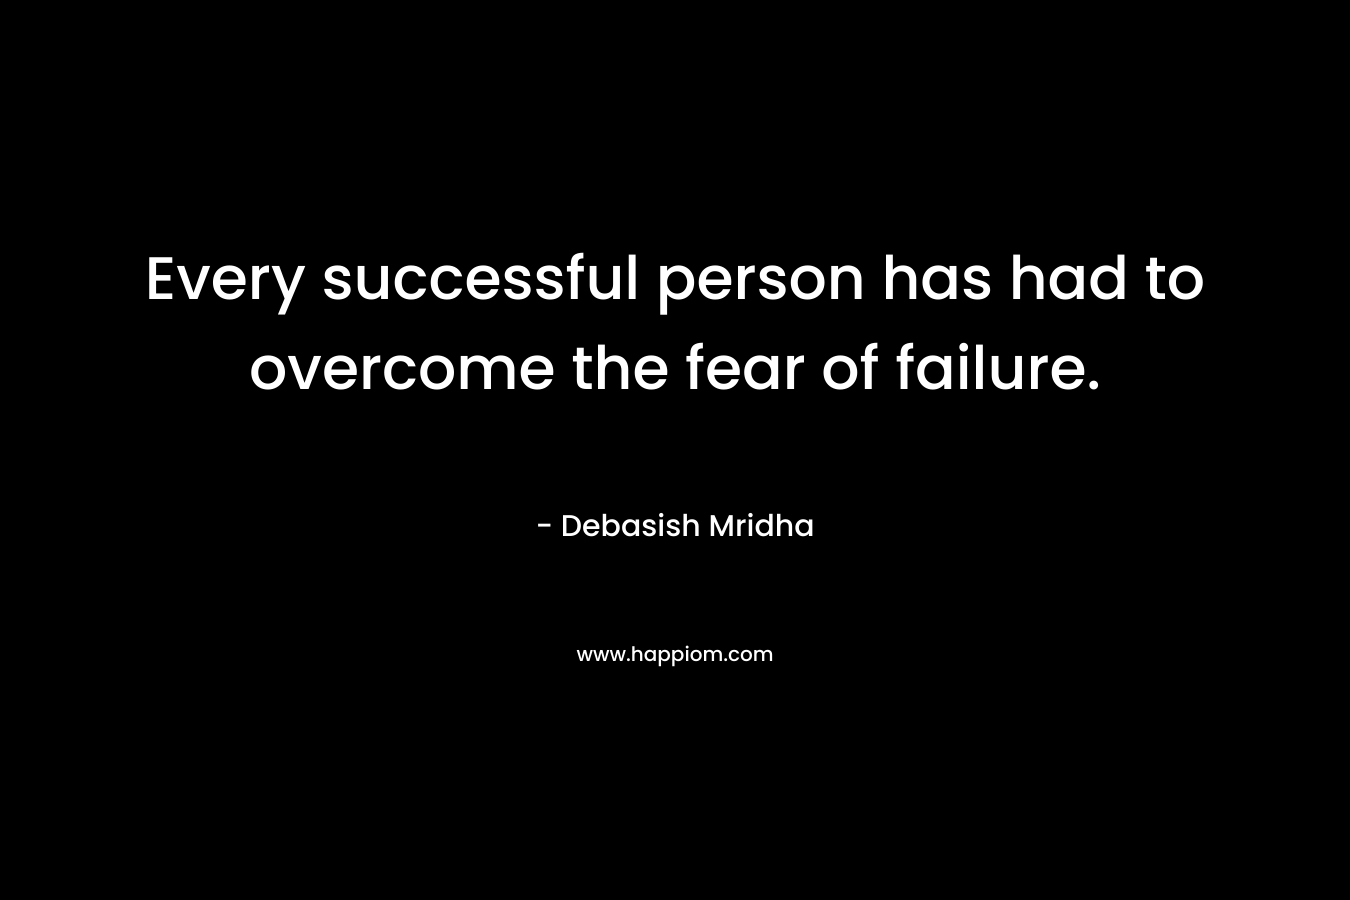 Every successful person has had to overcome the fear of failure.